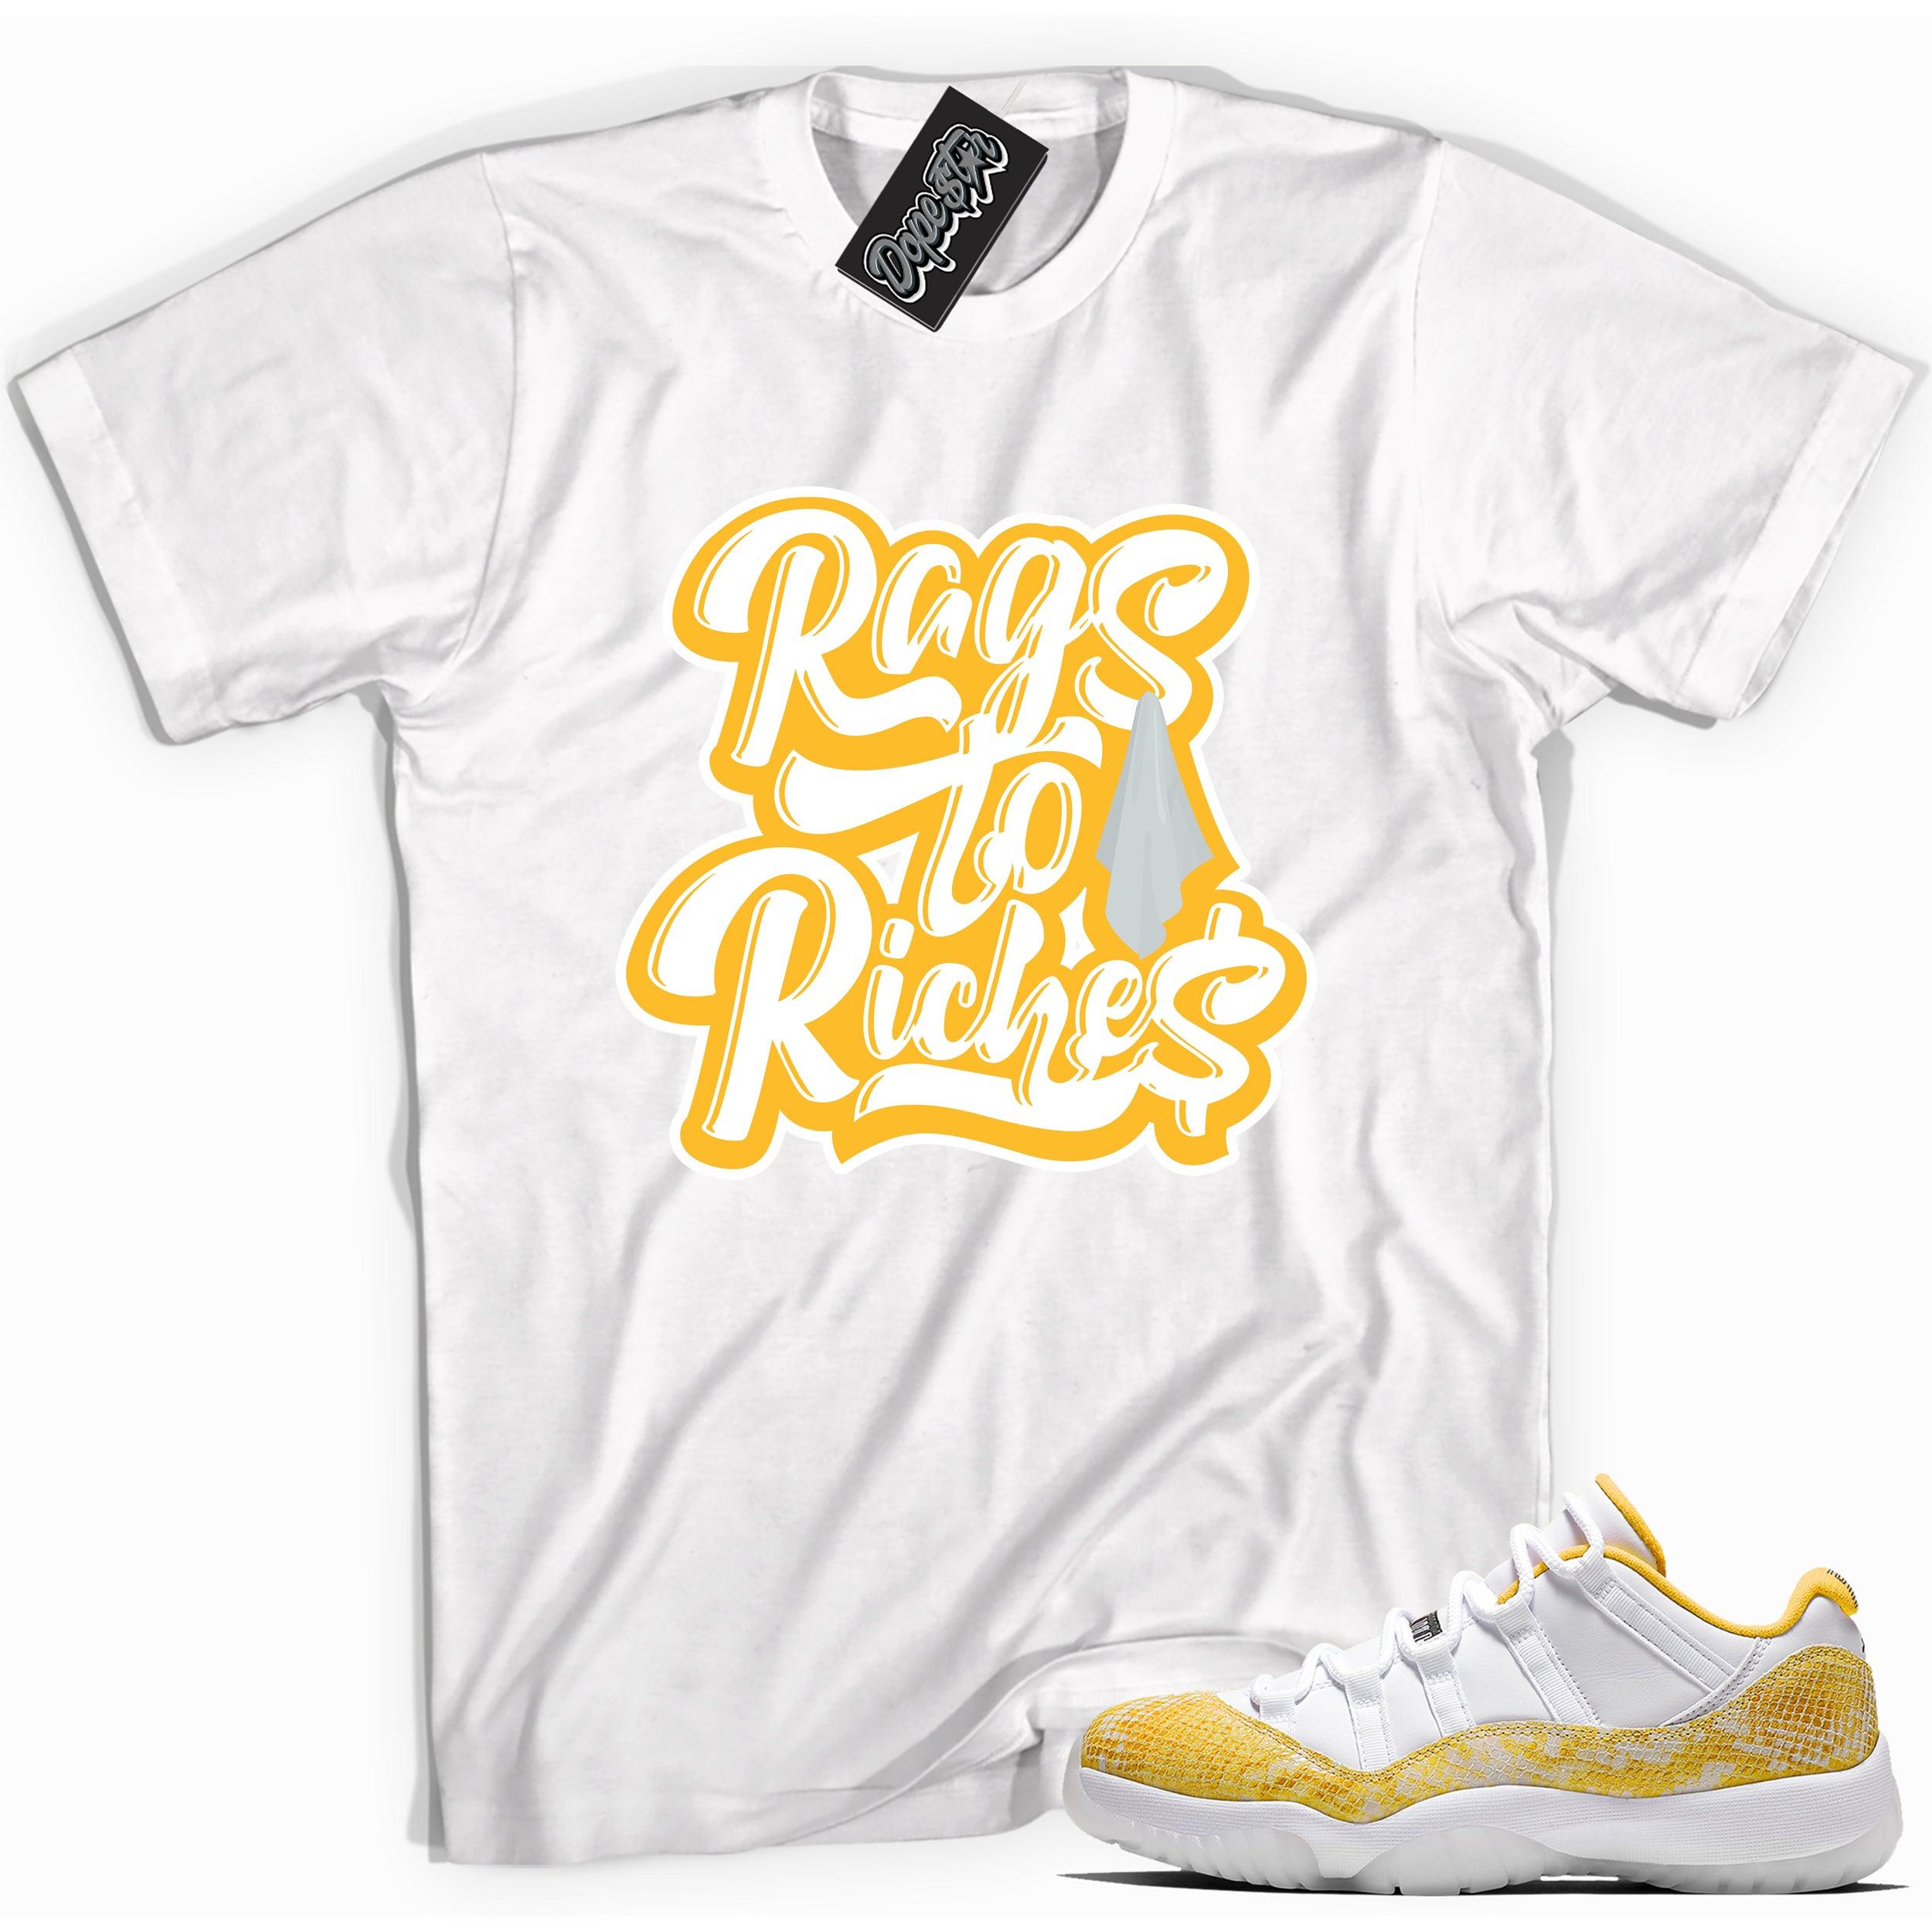 Cool white graphic tee with 'rags to riches' print, that perfectly matches Air Jordan 11 Retro Low Yellow Snakeskin sneakers